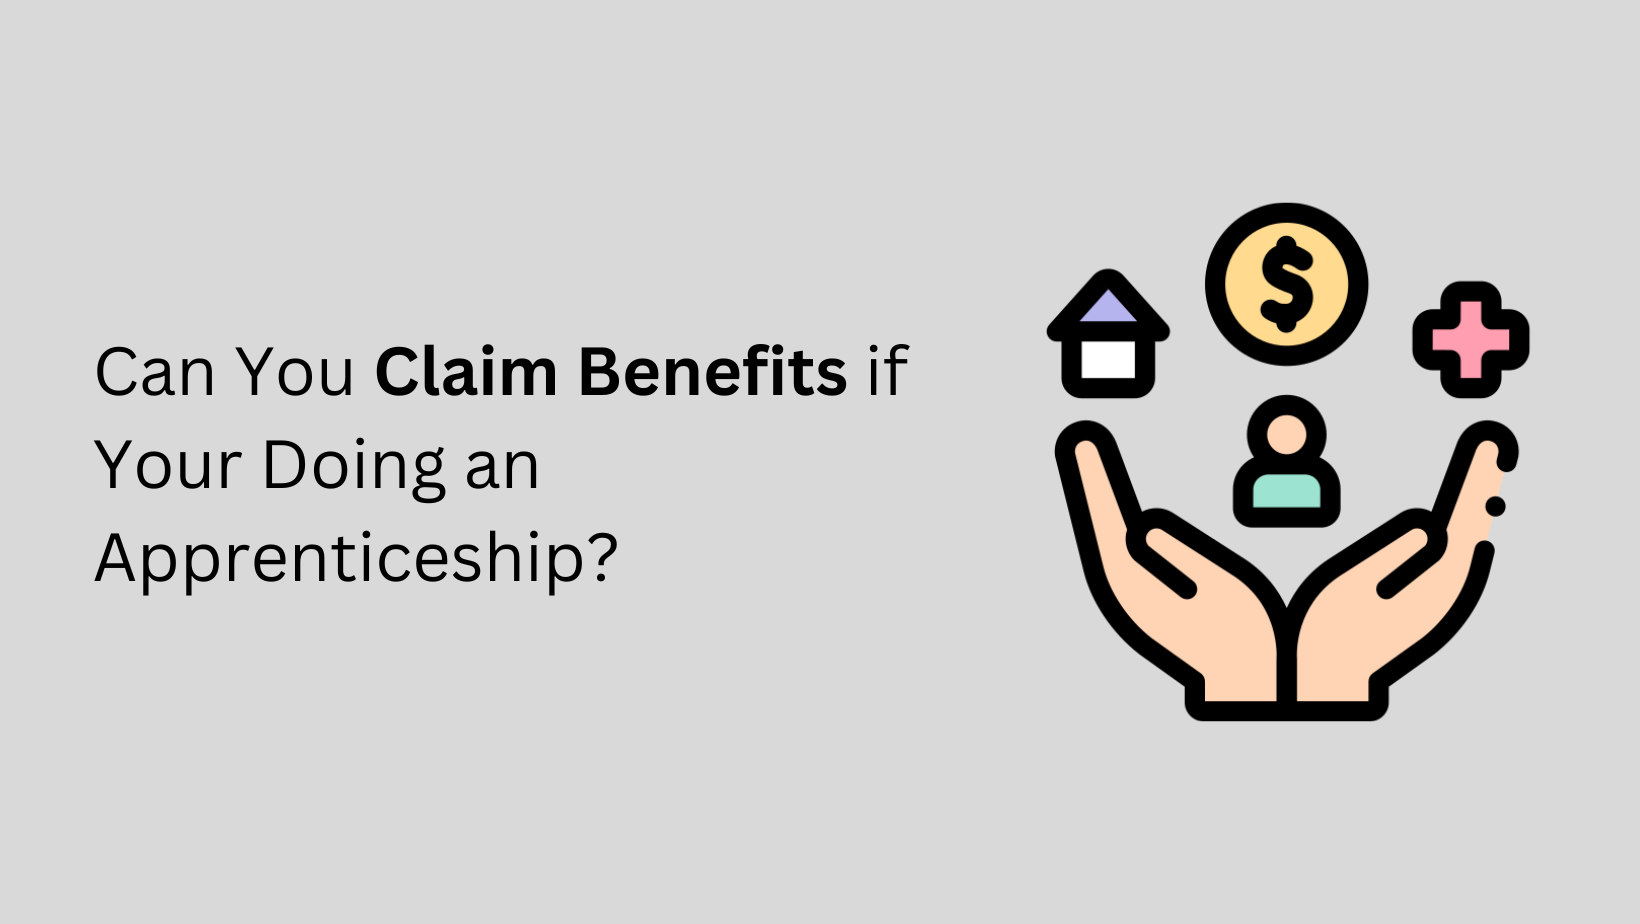 Can You Claim Benefits if Your Doing an Apprenticeship